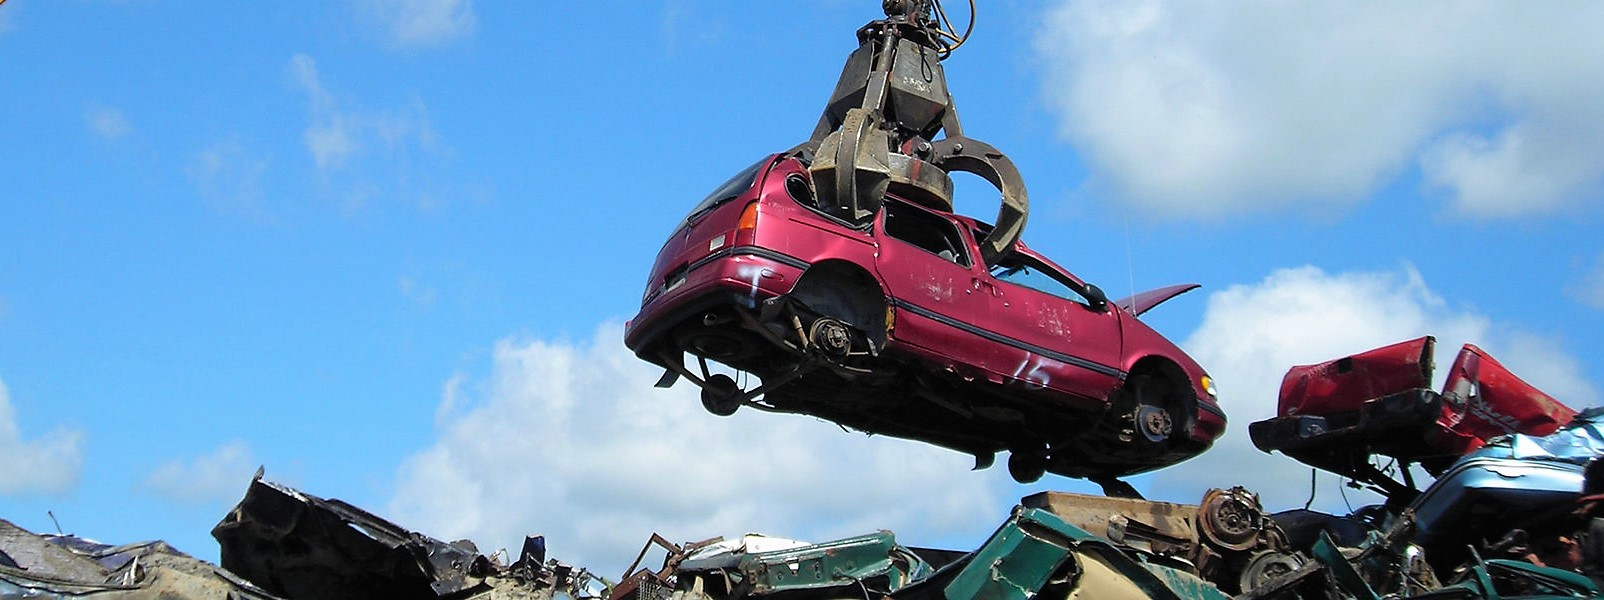 Why Recycling Your Old Vehicle is Good for the Environment'